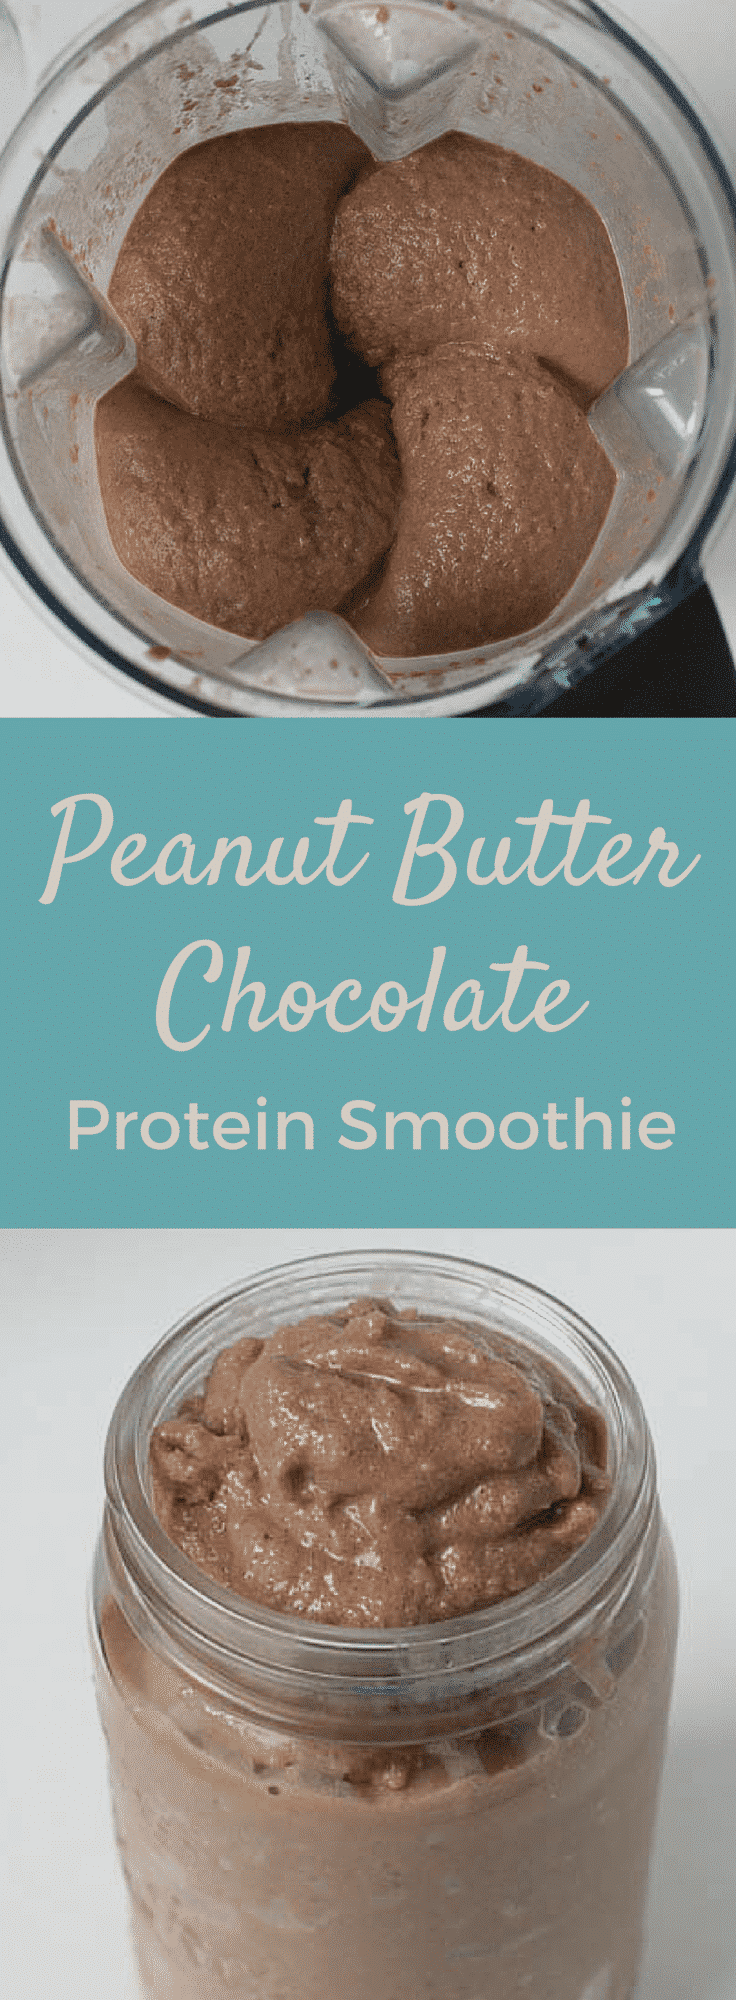 This Peanut Butter Chocolate Protein Smoothie is delicious, quick and easy to make and packed with a protein punch.